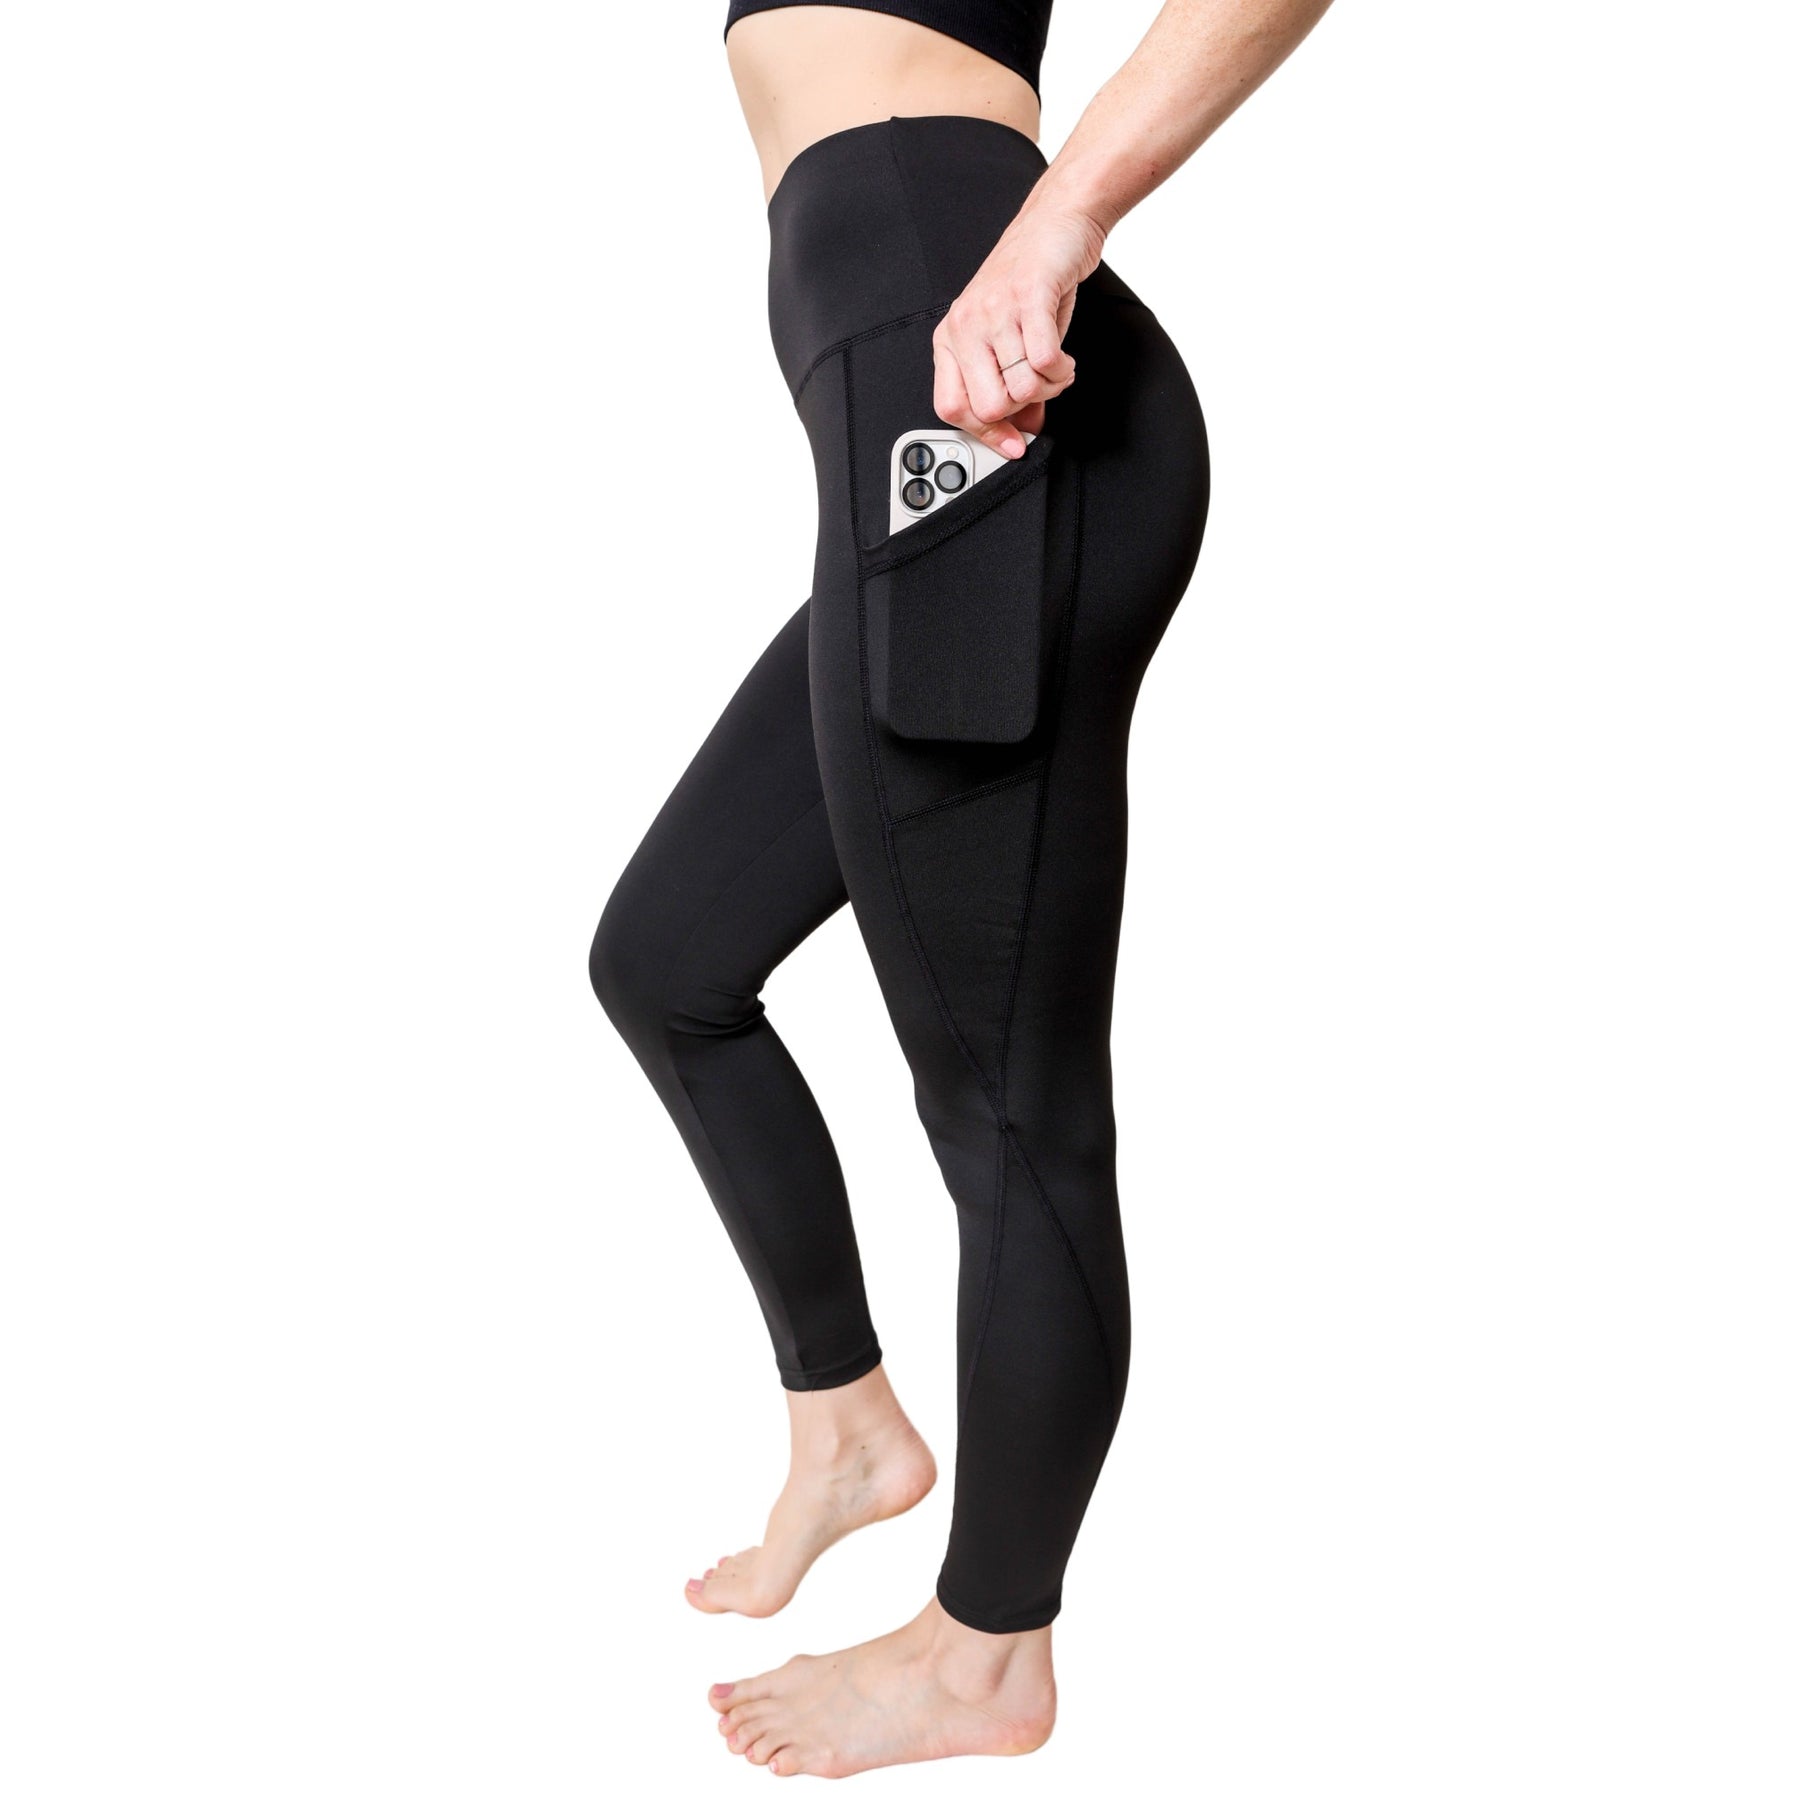 Black Buttery Soft Leggings With Side Pockets